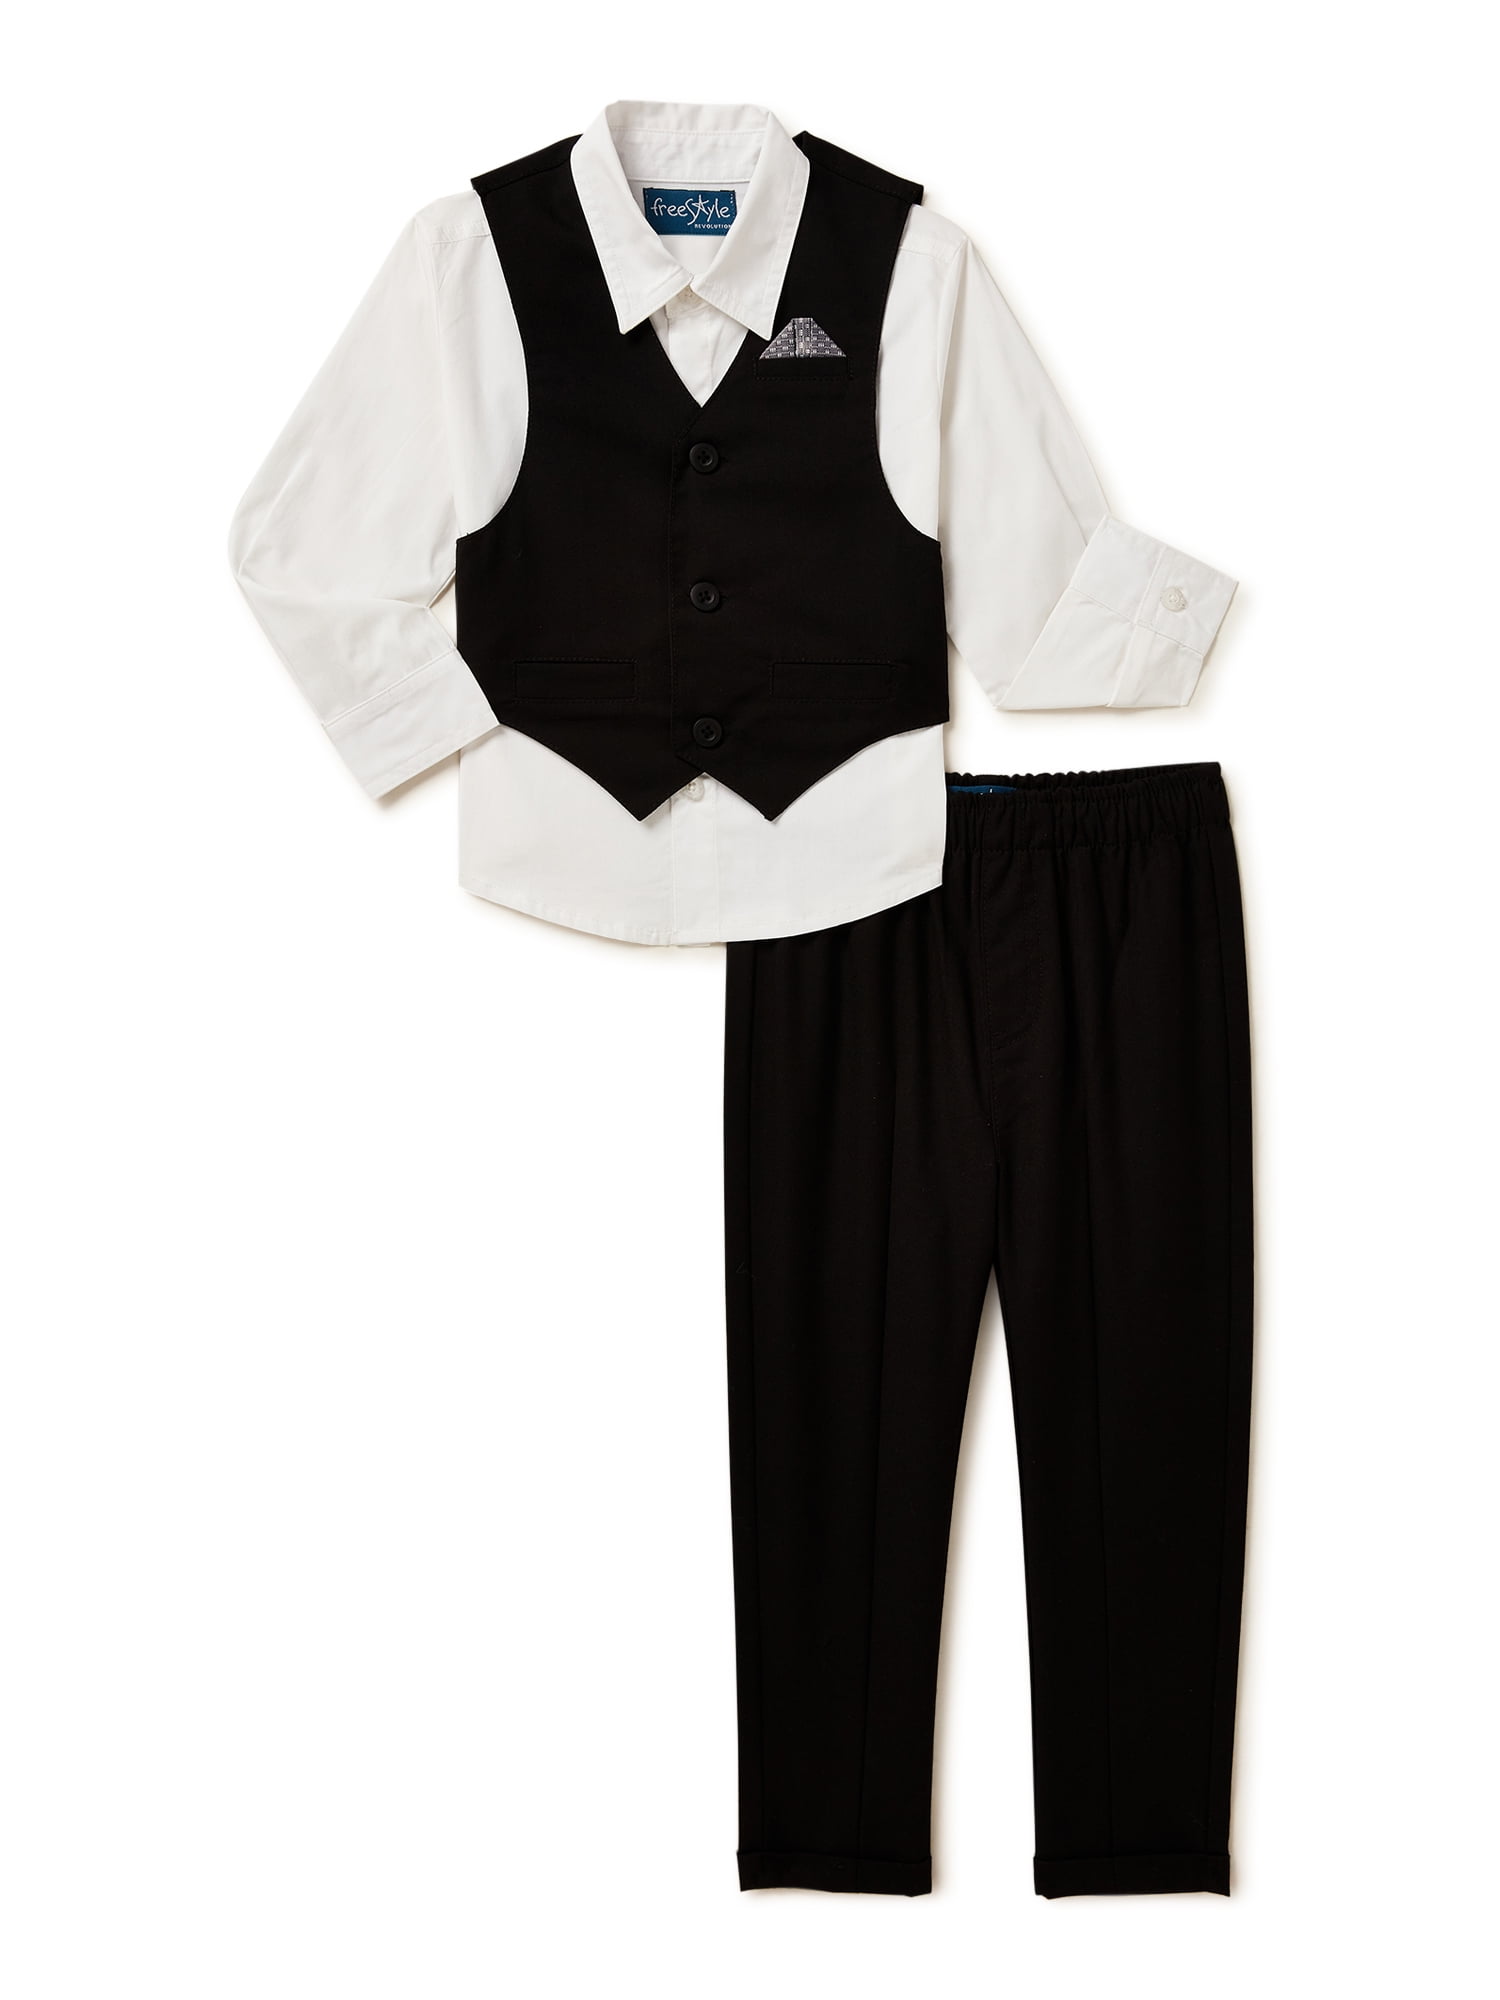 Freestyle Revolution Toddler Boy Dress Shirt, Vest and Pants Outfit Set ...